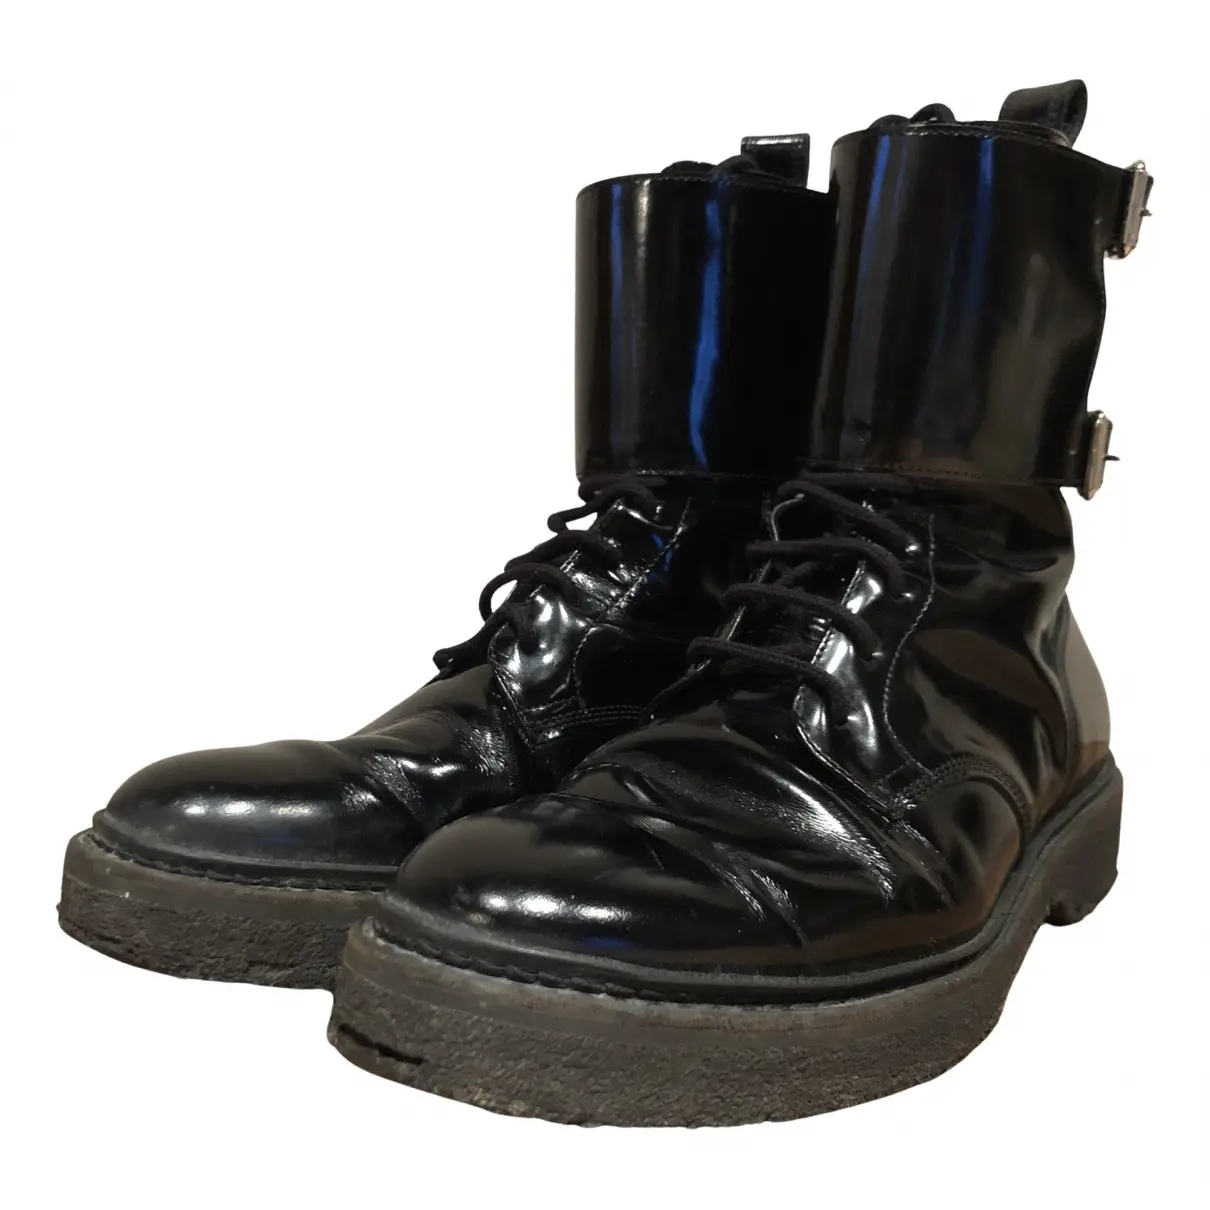 Patent leather boots Balmain For H&M